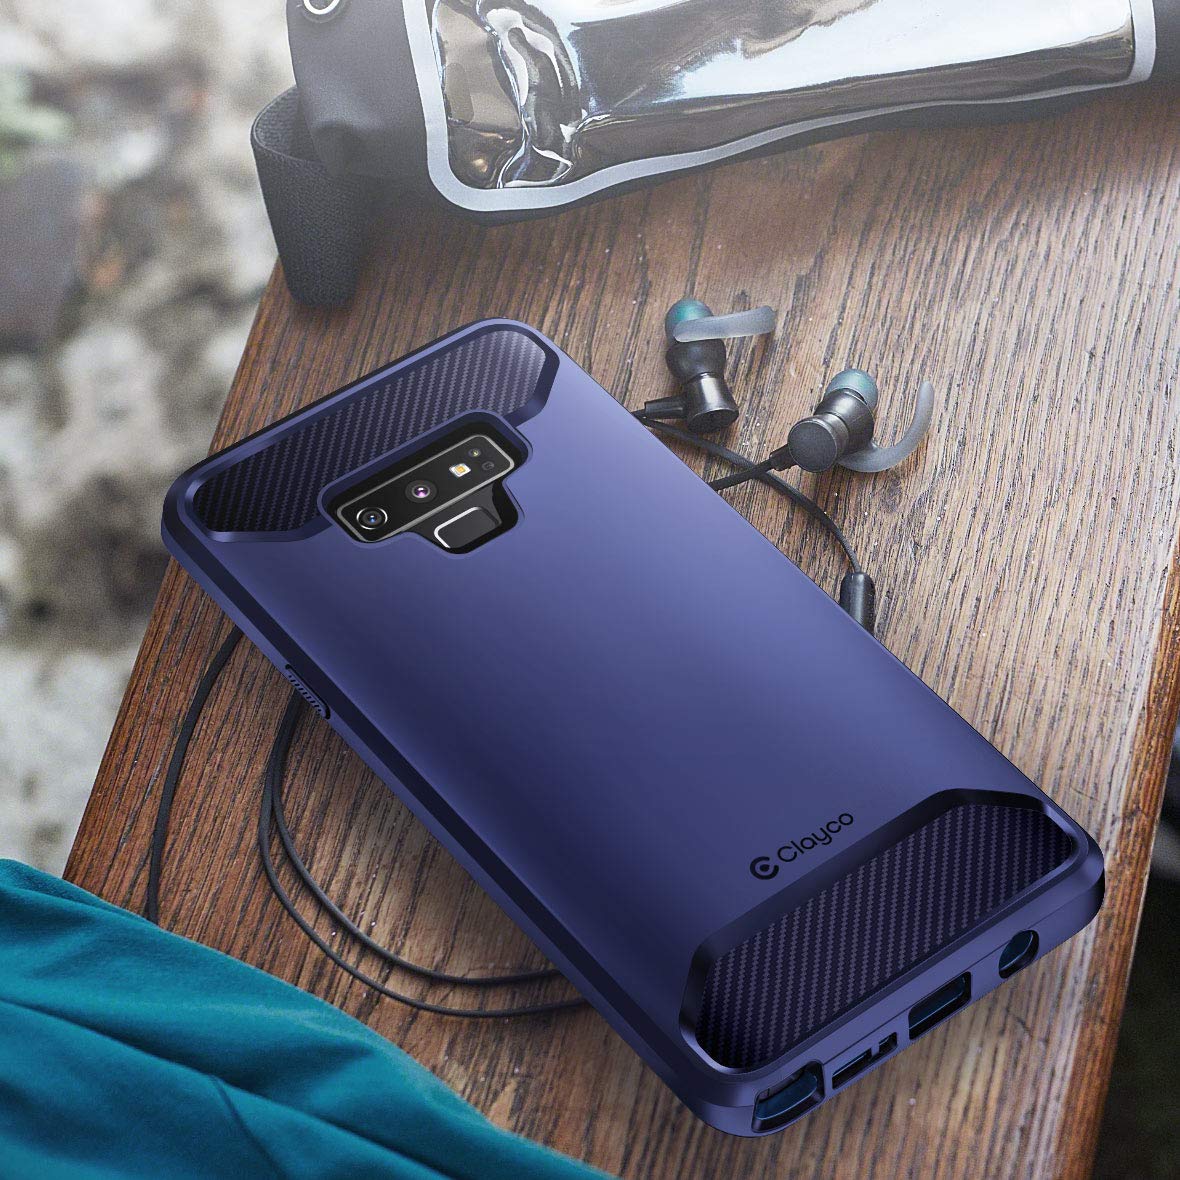 Clayco Xenon Series Samsung Galaxy Note 9 Full-Body Rugged Case - Blue, Built-in 3D Screen Protector